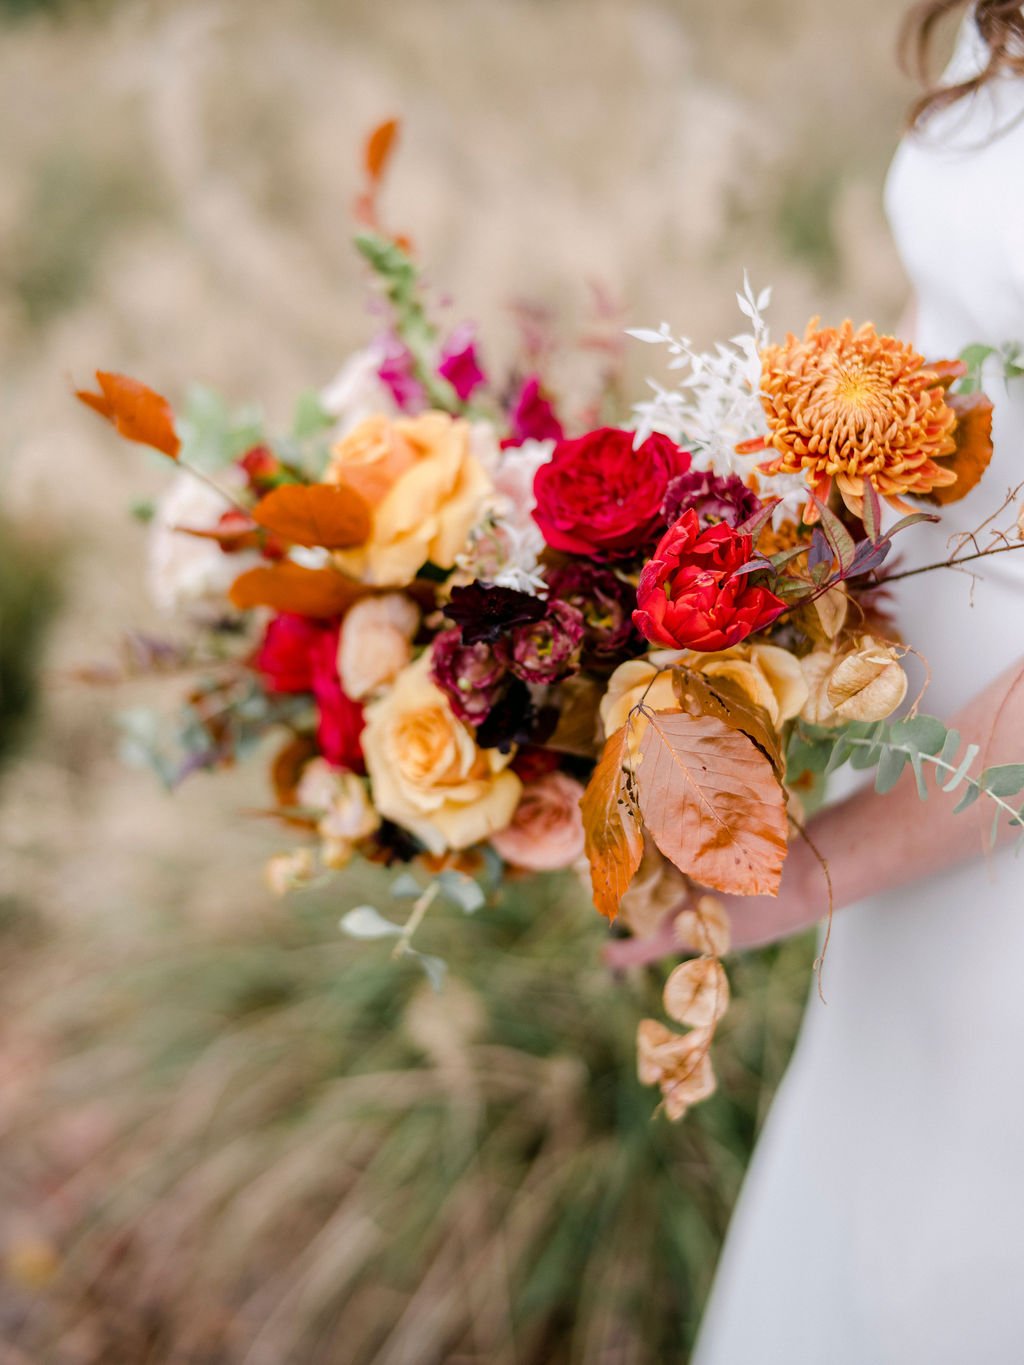 An elegant bridal bouquet filled with vibrant red, cream, terra cotta, and burnt orange florals. The bouquet features roses, tulips, carnations, eucalyptus, and dried floral accents. Design by Rosemary and Finch in Nashville, TN. Location Atlanta, GA